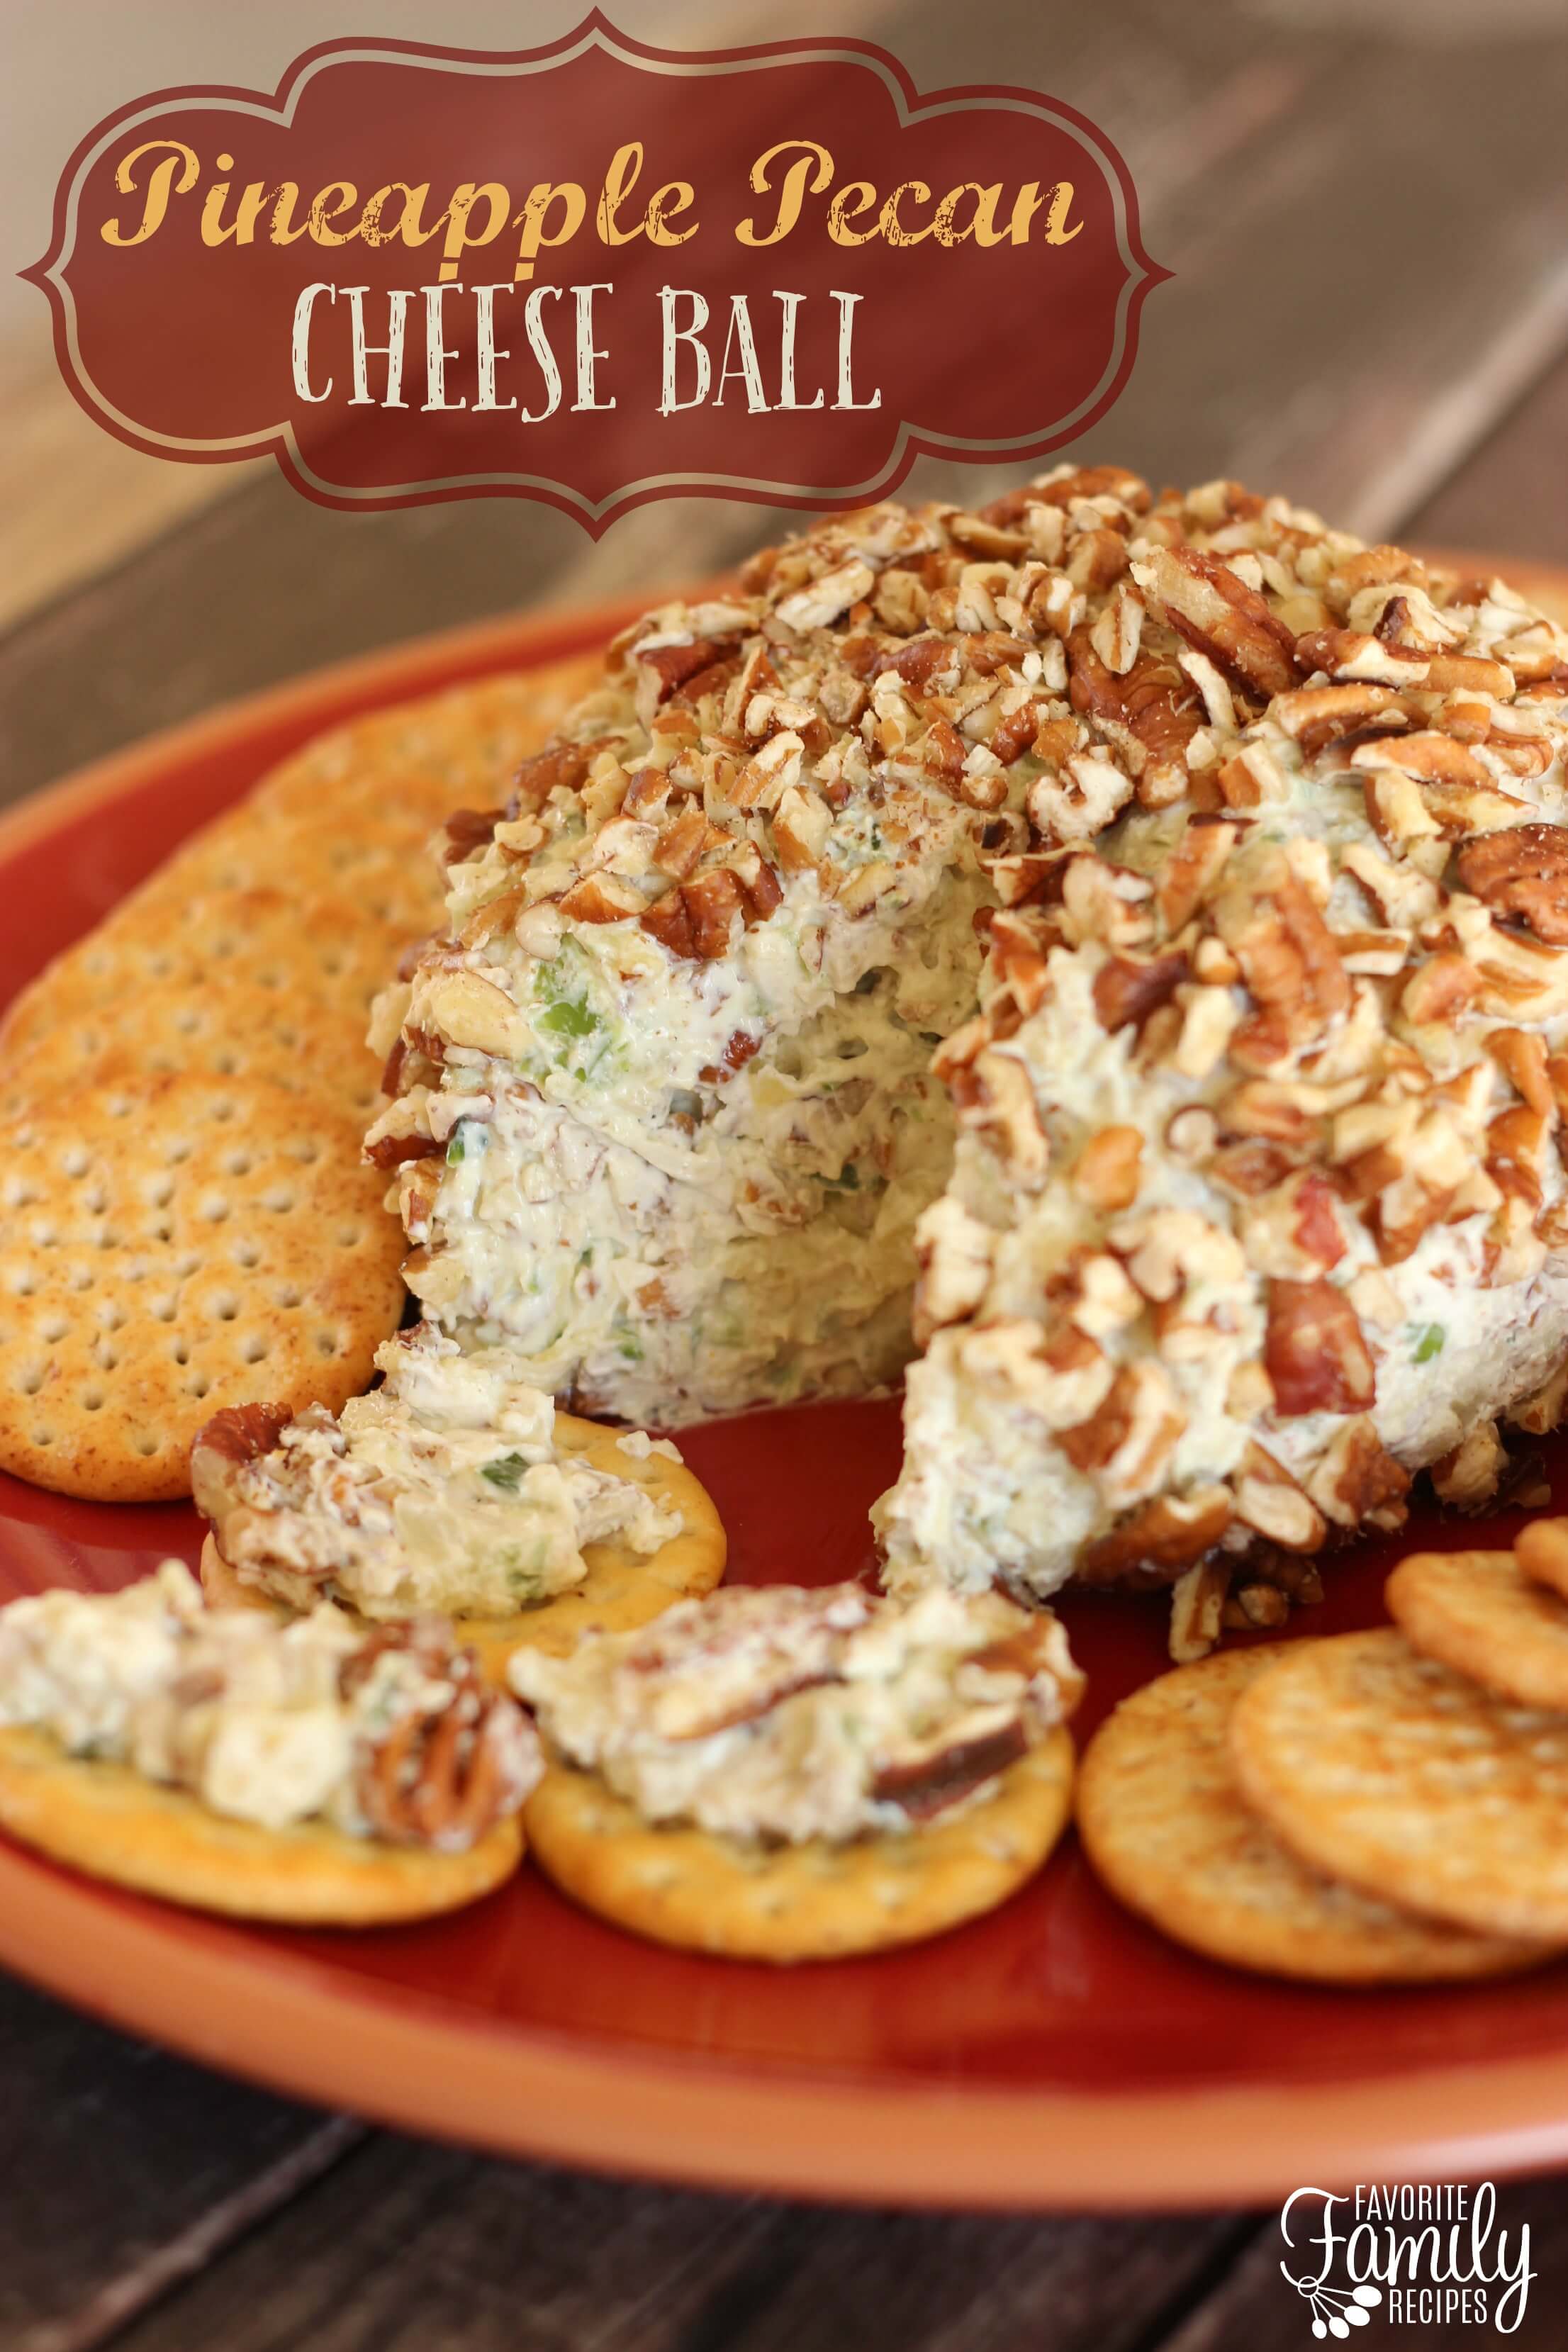 Pineapple Pecan Cheese Ball | Favorite Family Recipes